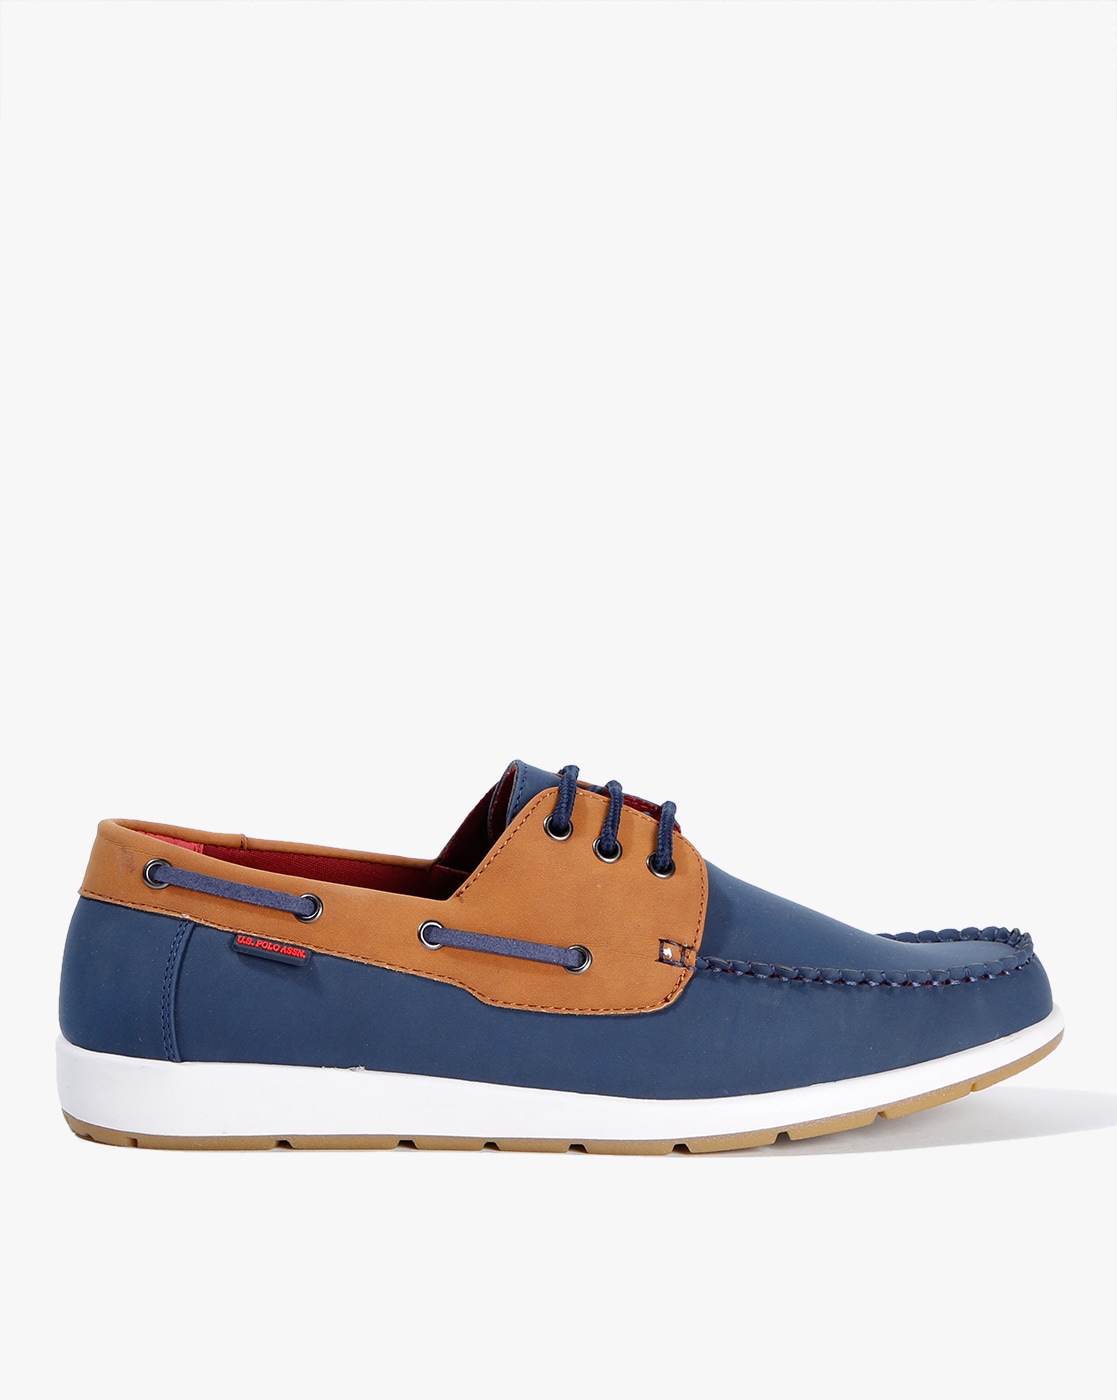 polo shoes navy blue